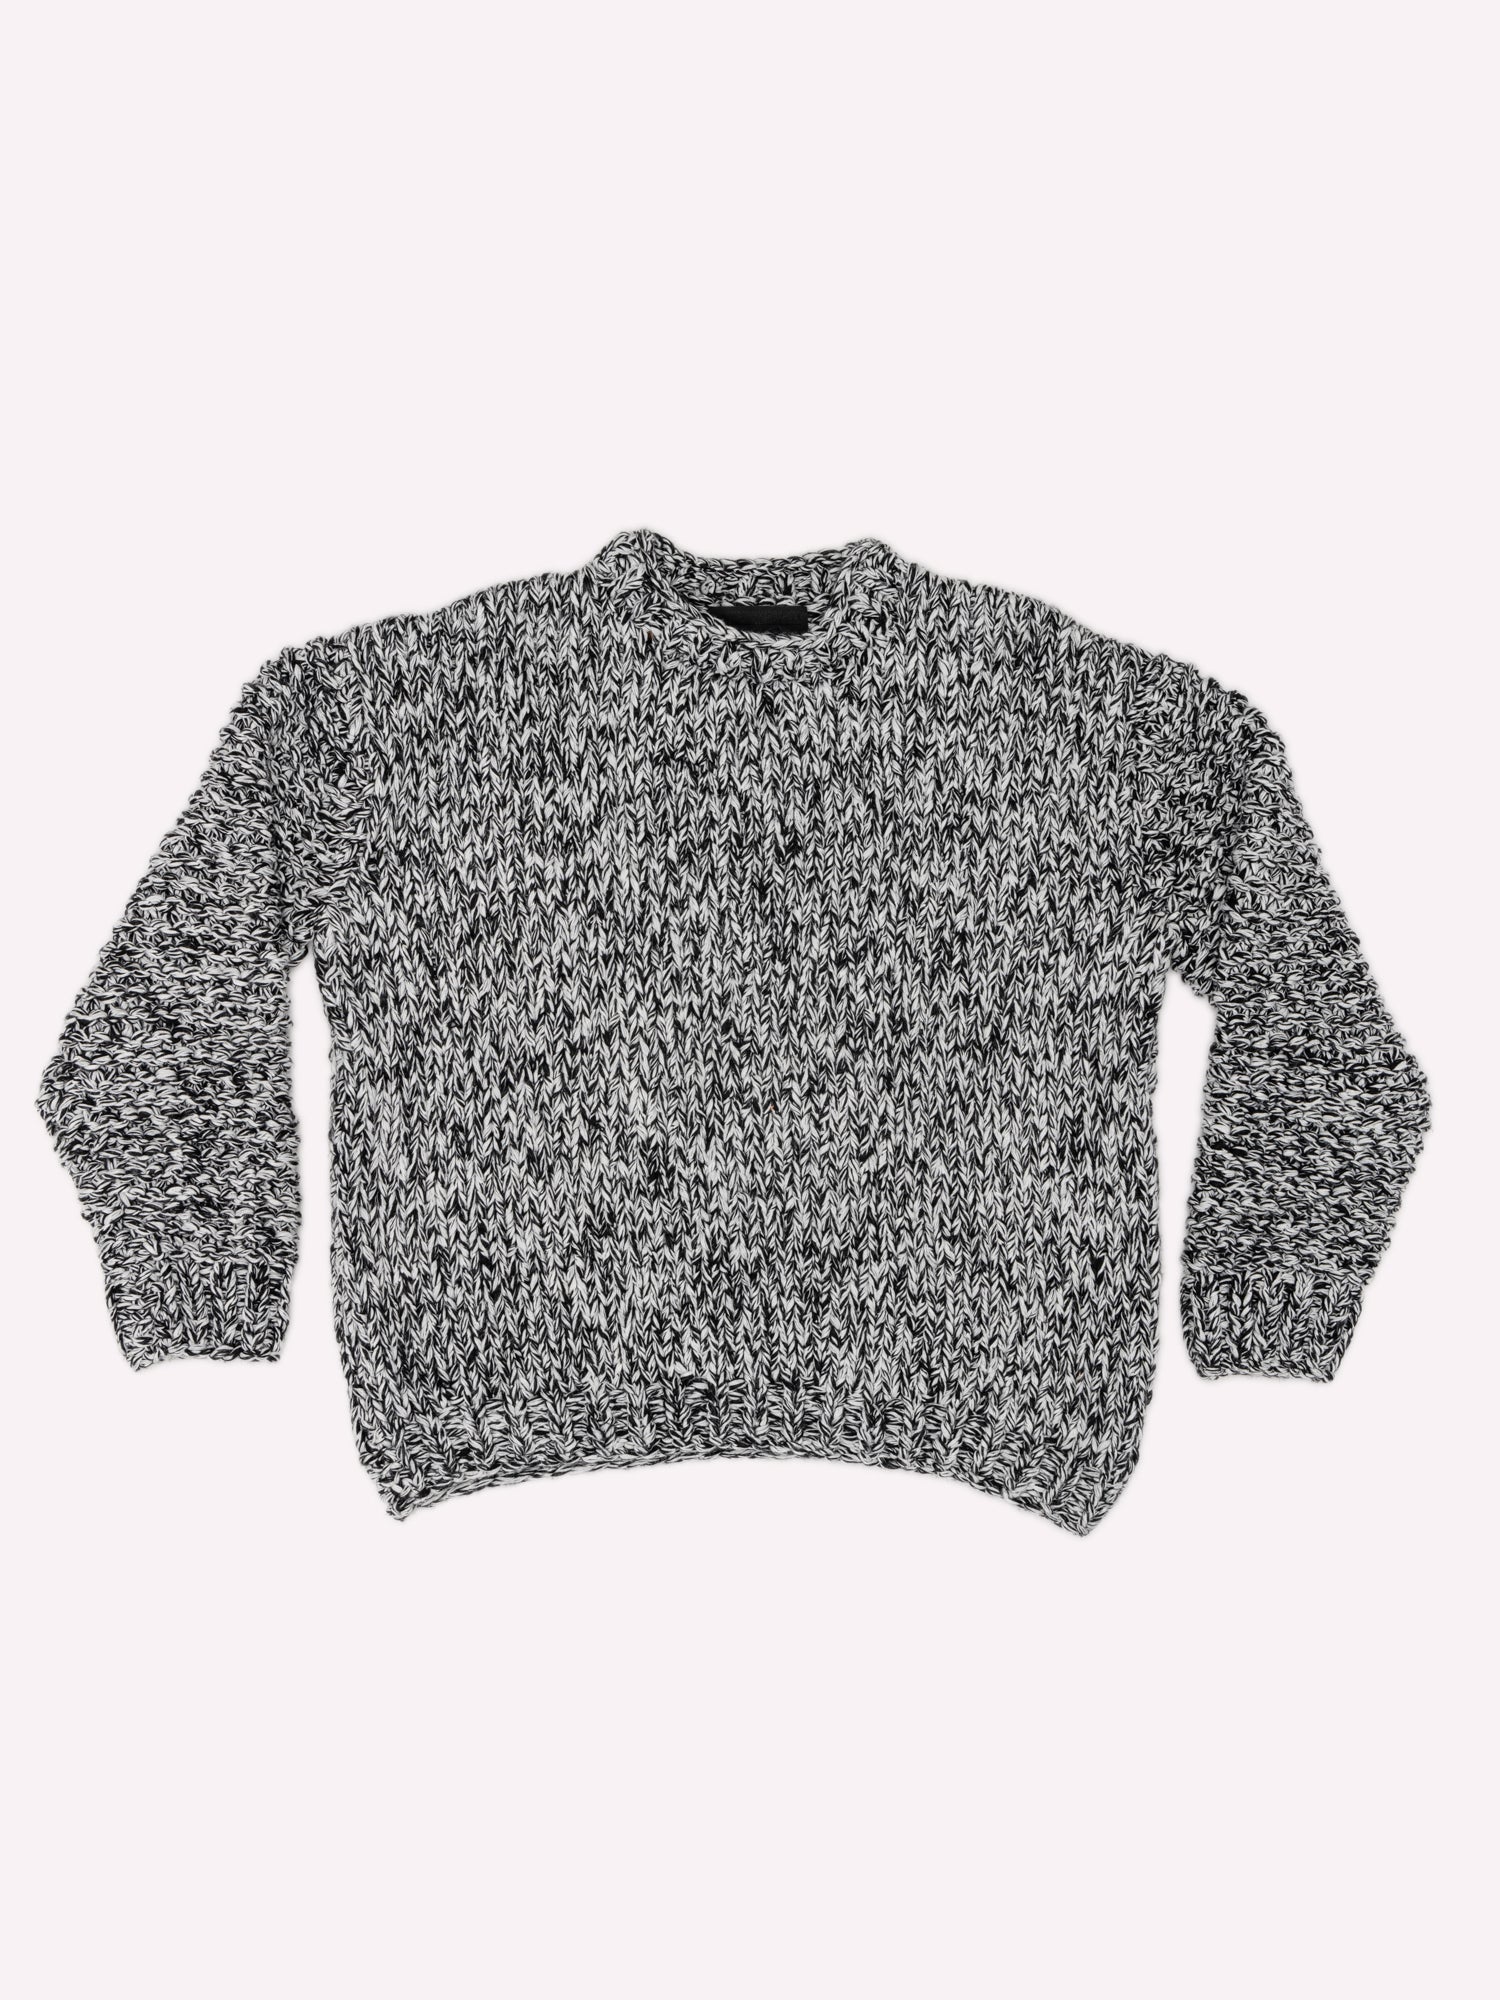 O'Connor Sweater in White and Black